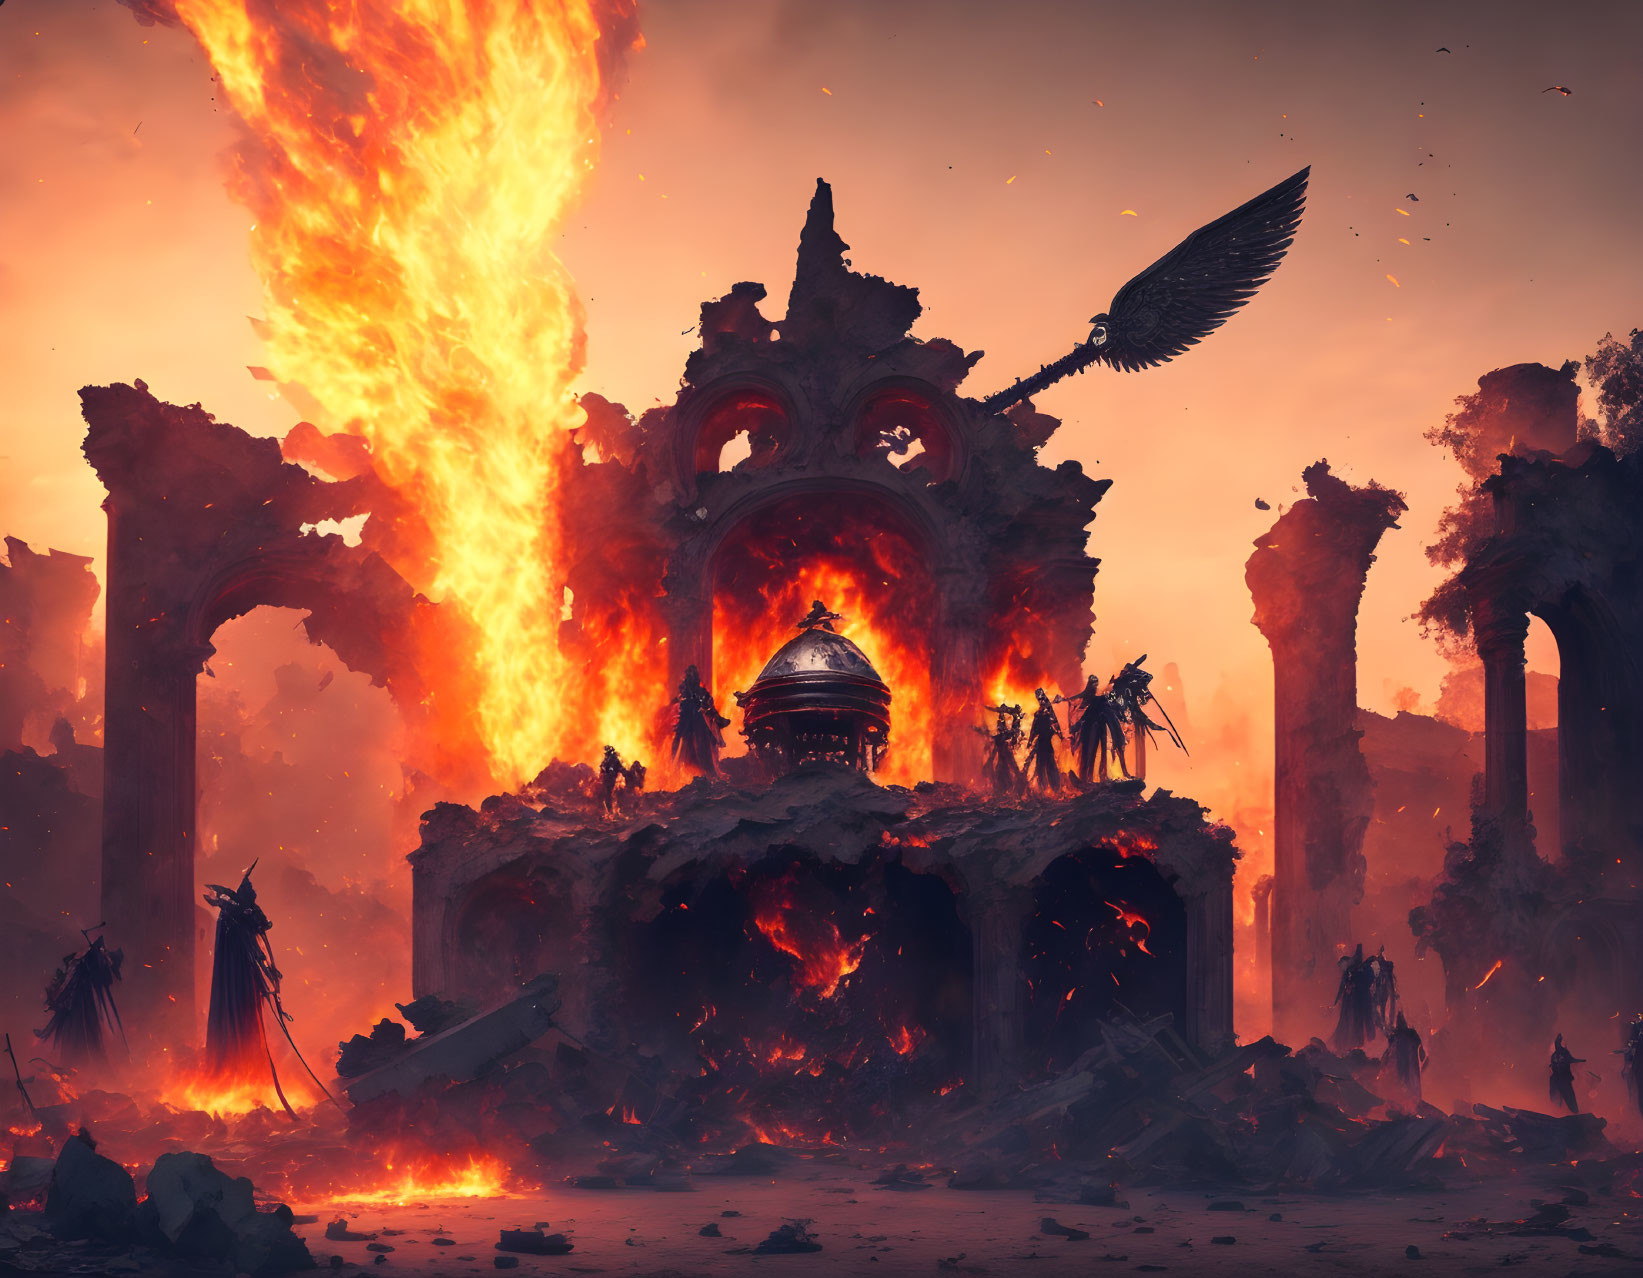 Apocalyptic scene with fiery explosions and crumbling architecture